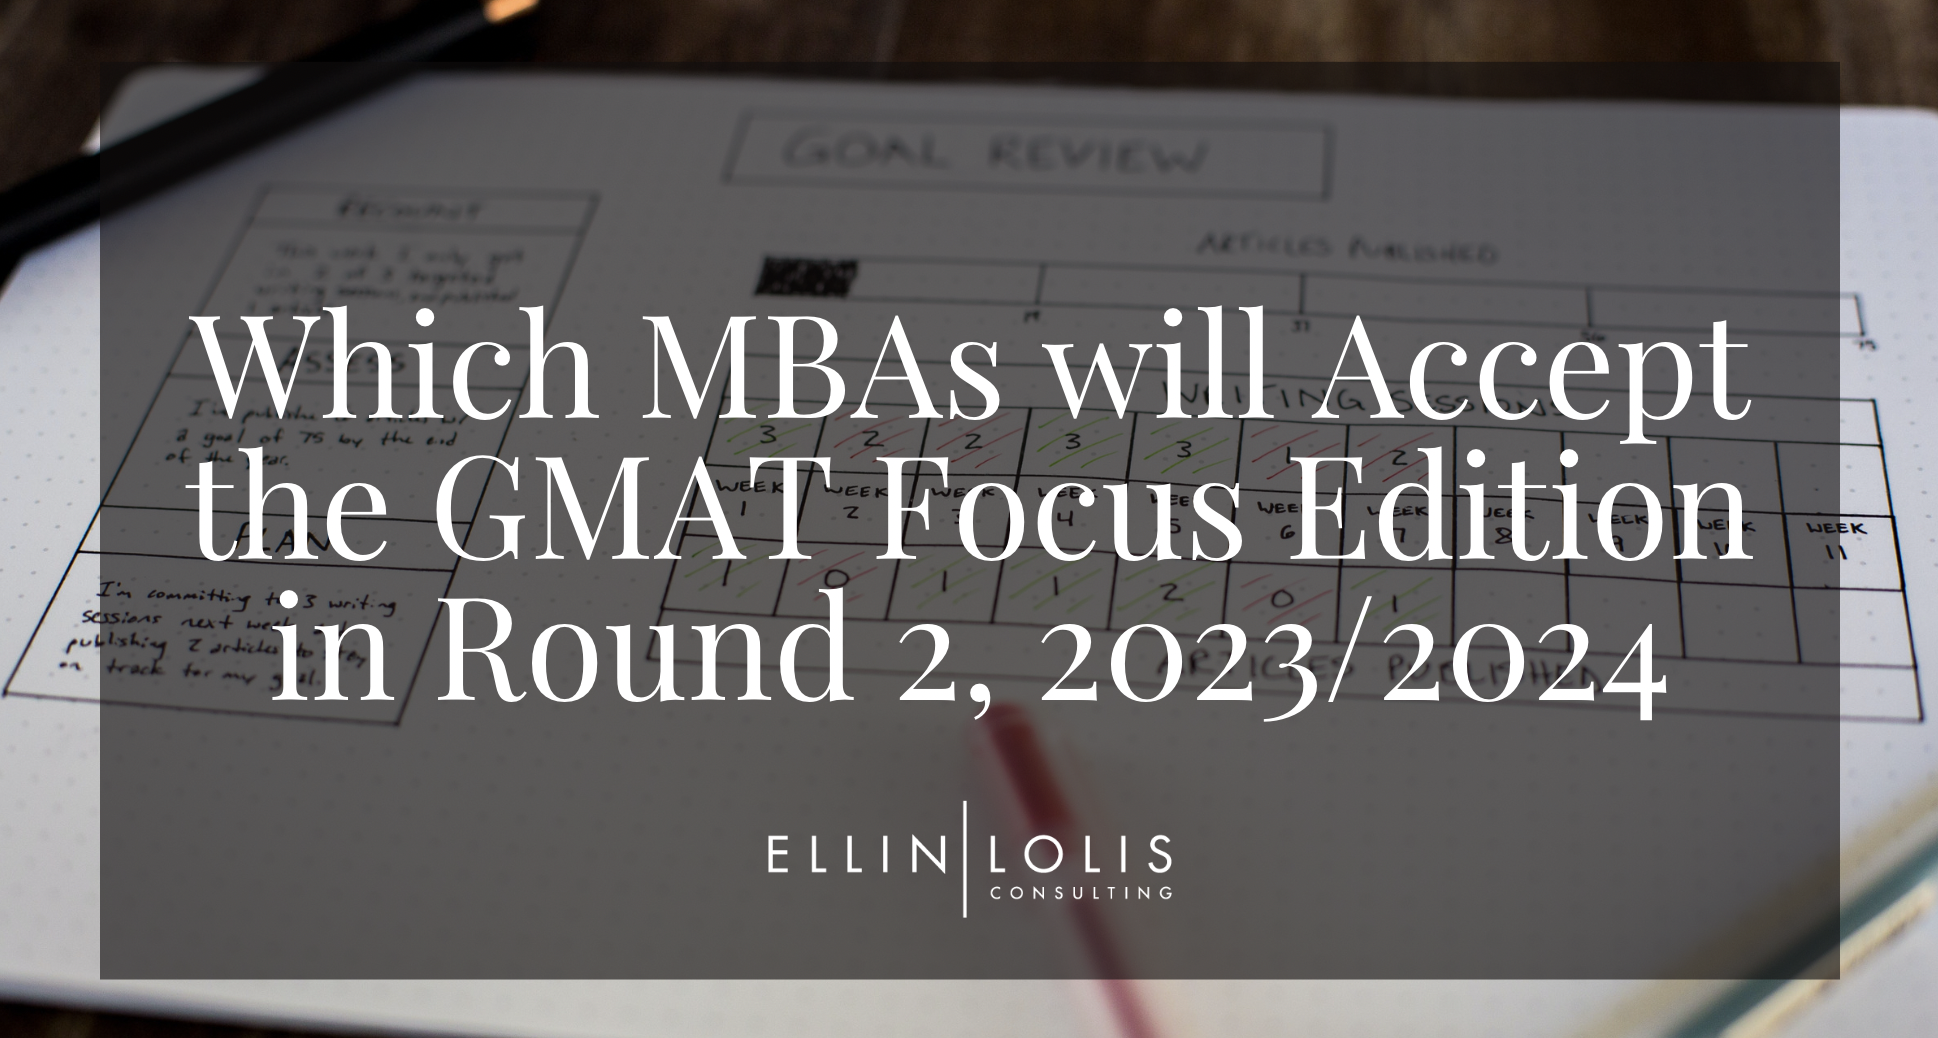 Which MBAs will Accept the GMAT Focus Edition in Round 2, 2023/2024